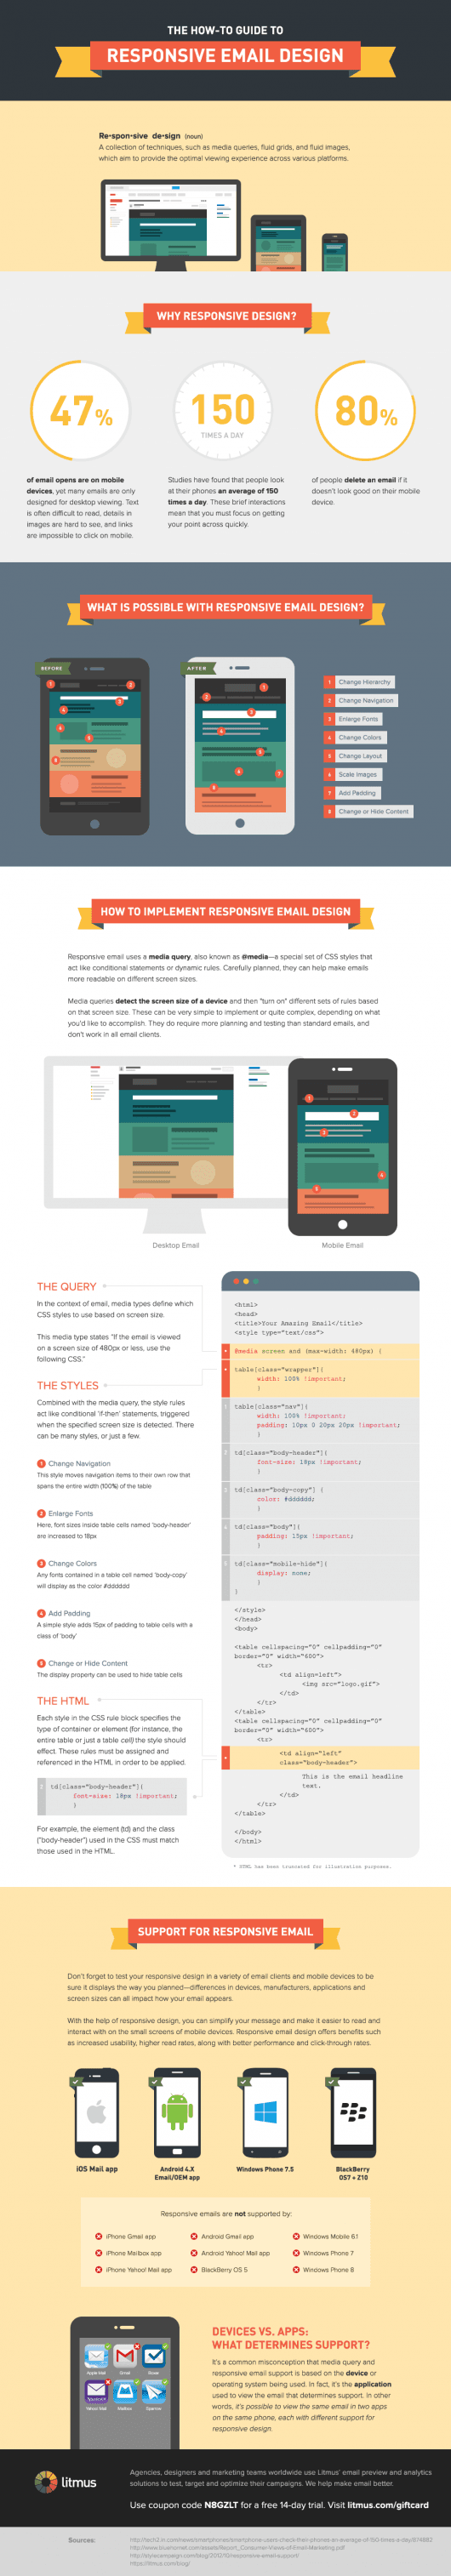 Responsive Email Design HowTo